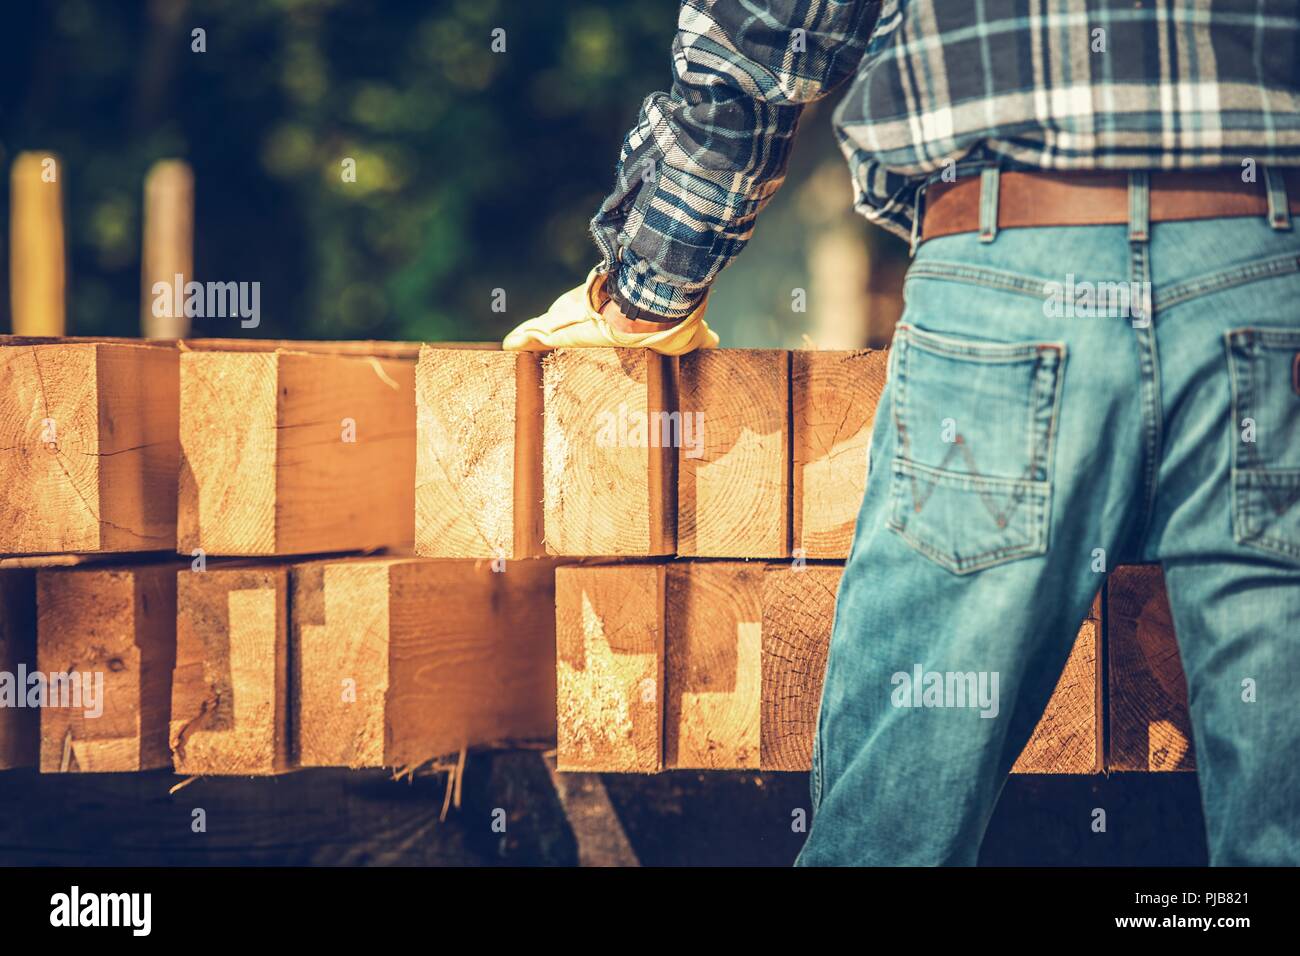 Carpenter Wood Material. Woodworking Contractor Preparing for the Construction Job. Stock Photo